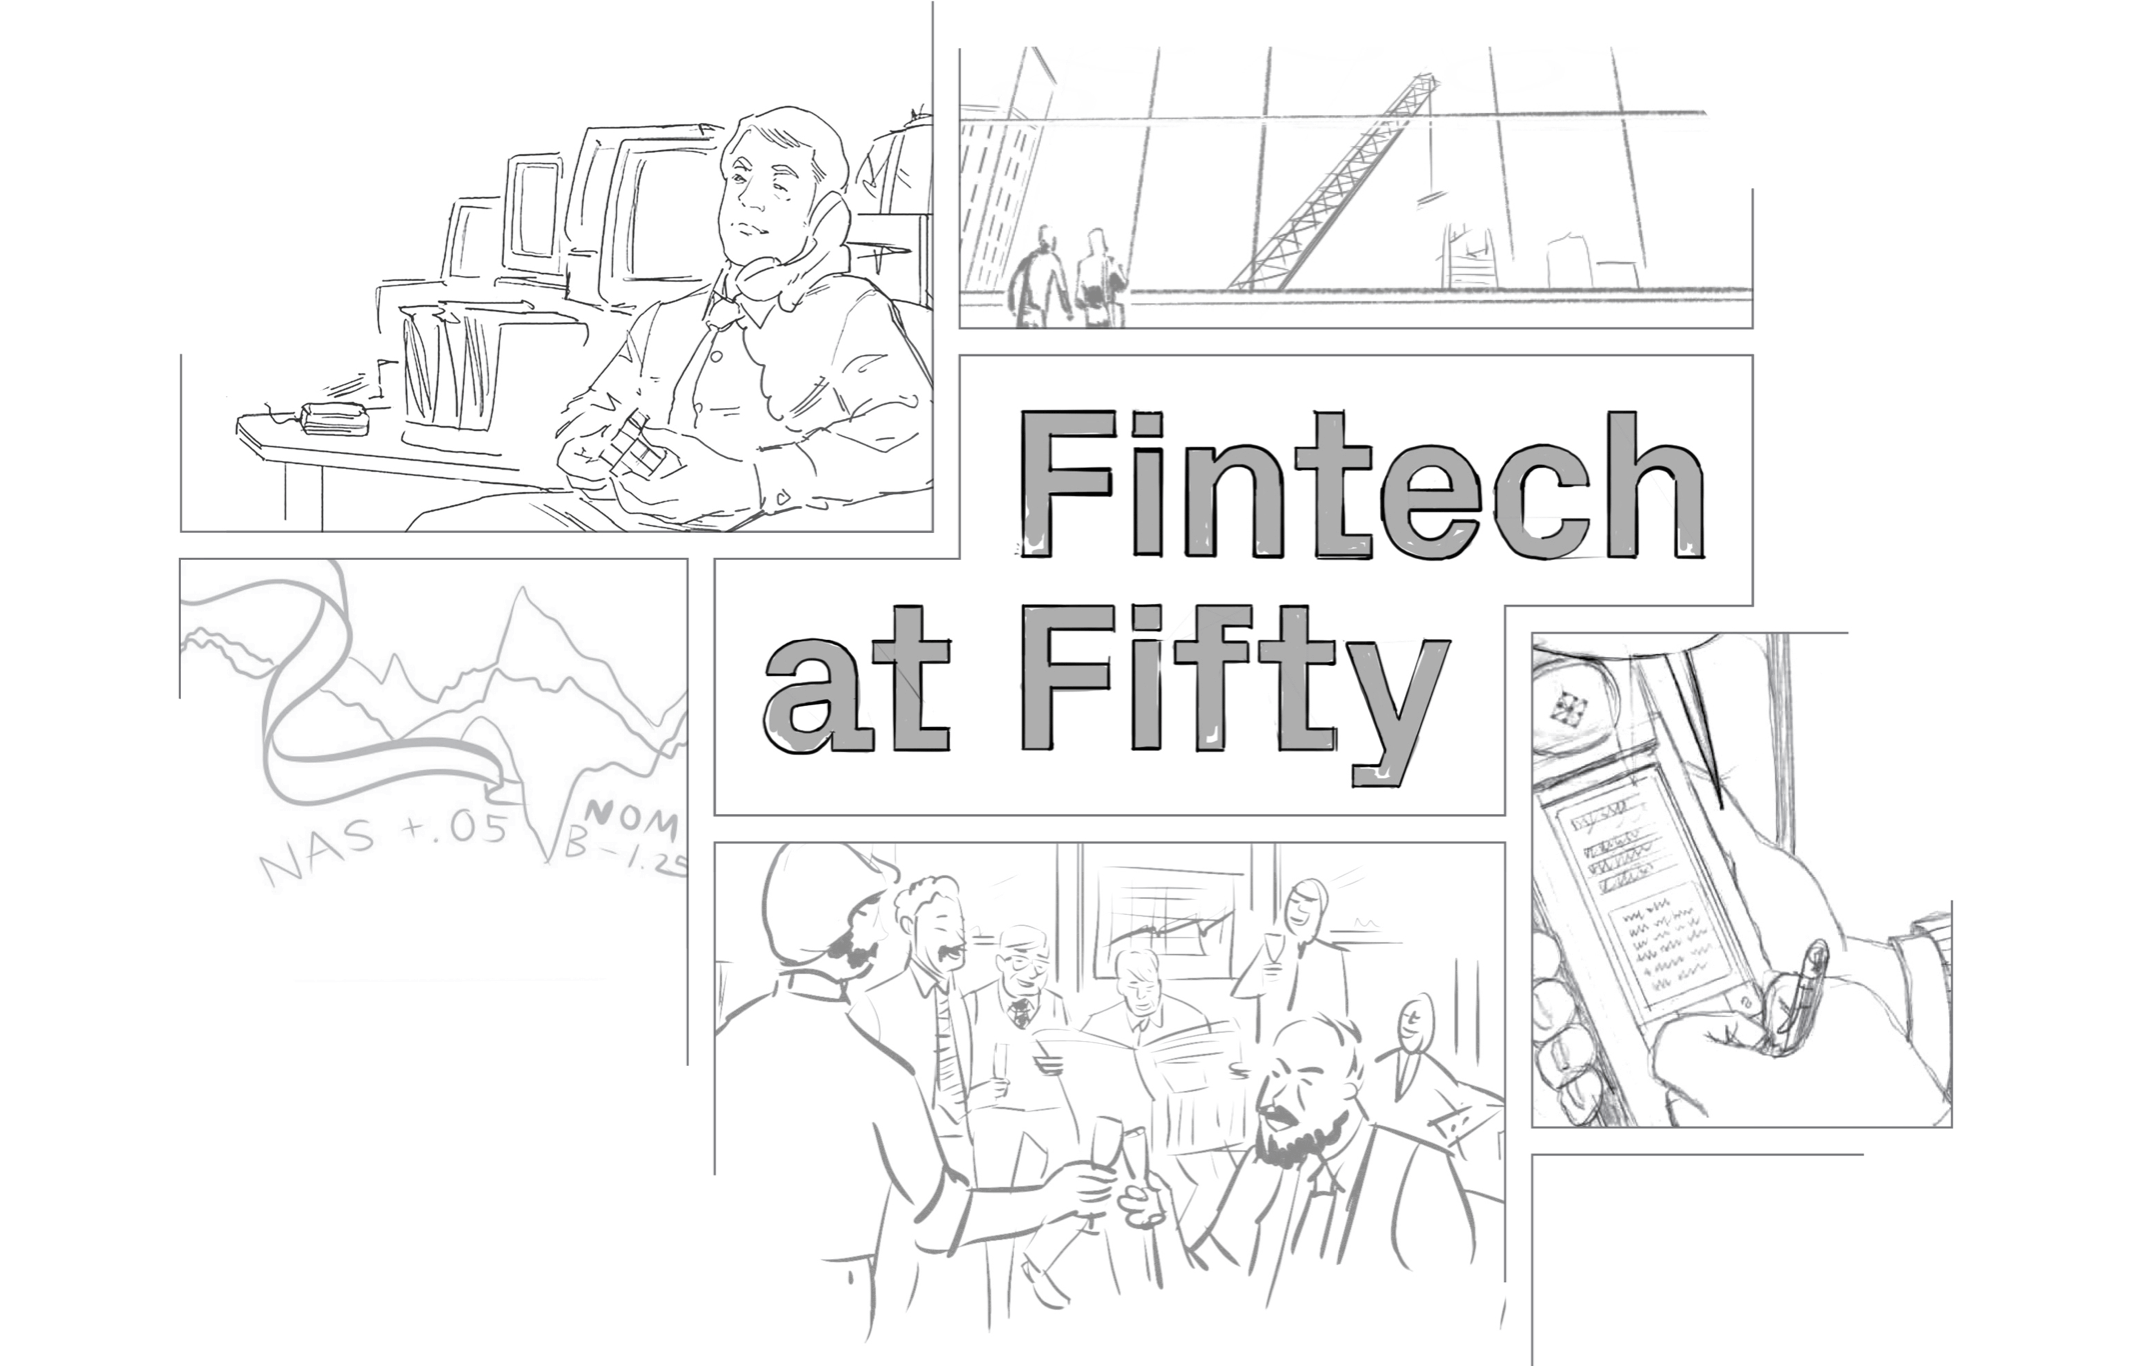 Pencil sketches of the artwork from several chapters of Fintech at Fifty.